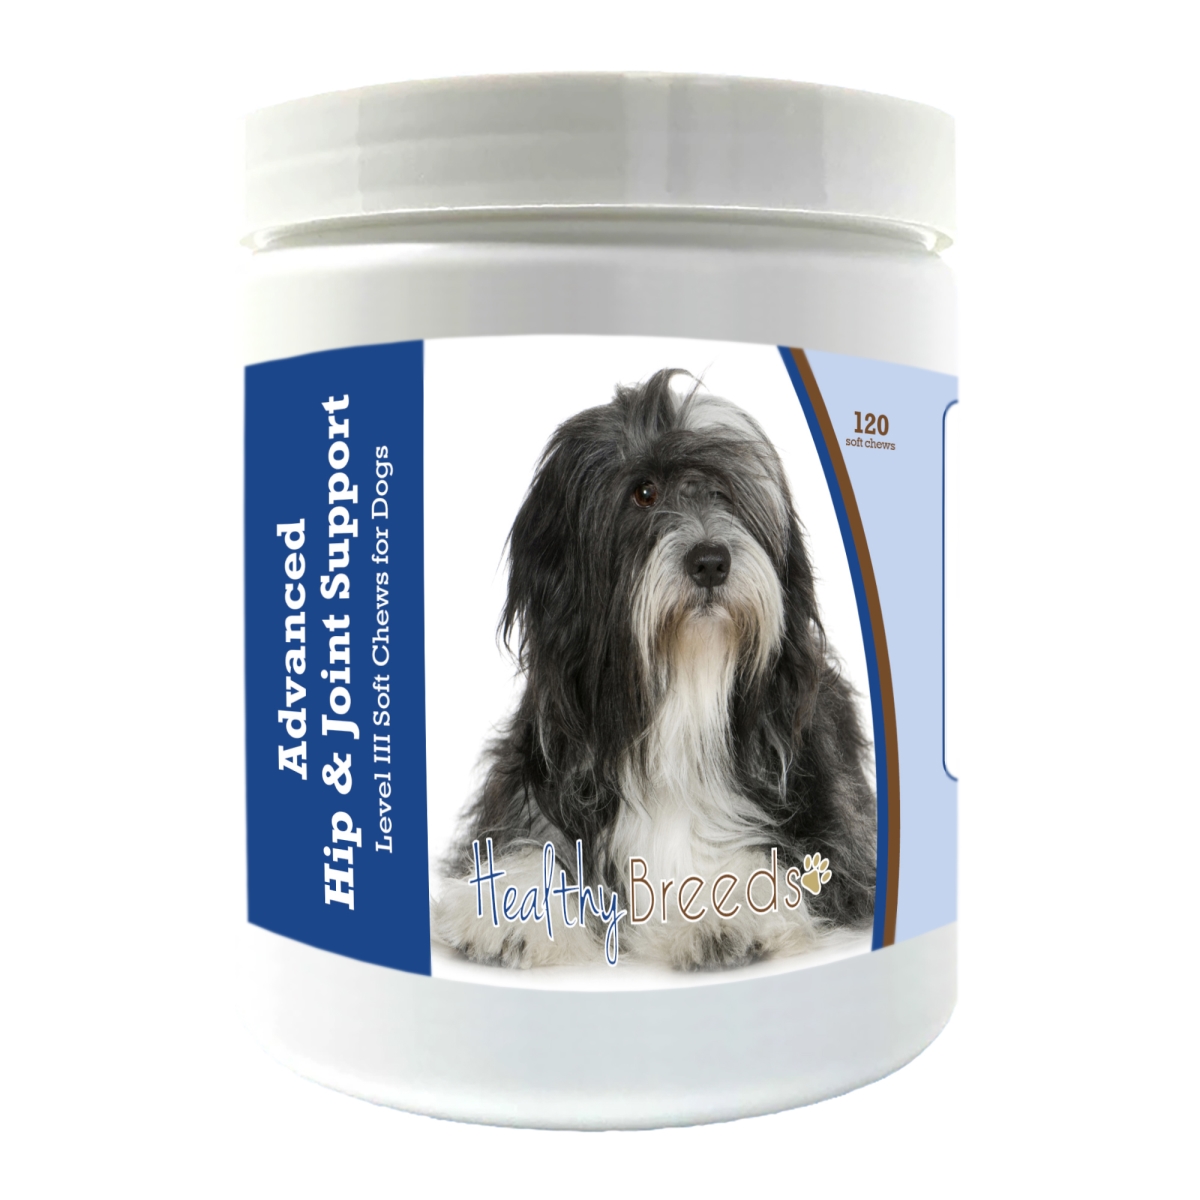 Picture of Healthy Breeds 192959898637 Lhasa Apso Advanced Hip & Joint Support Level III Soft Chews for Dogs